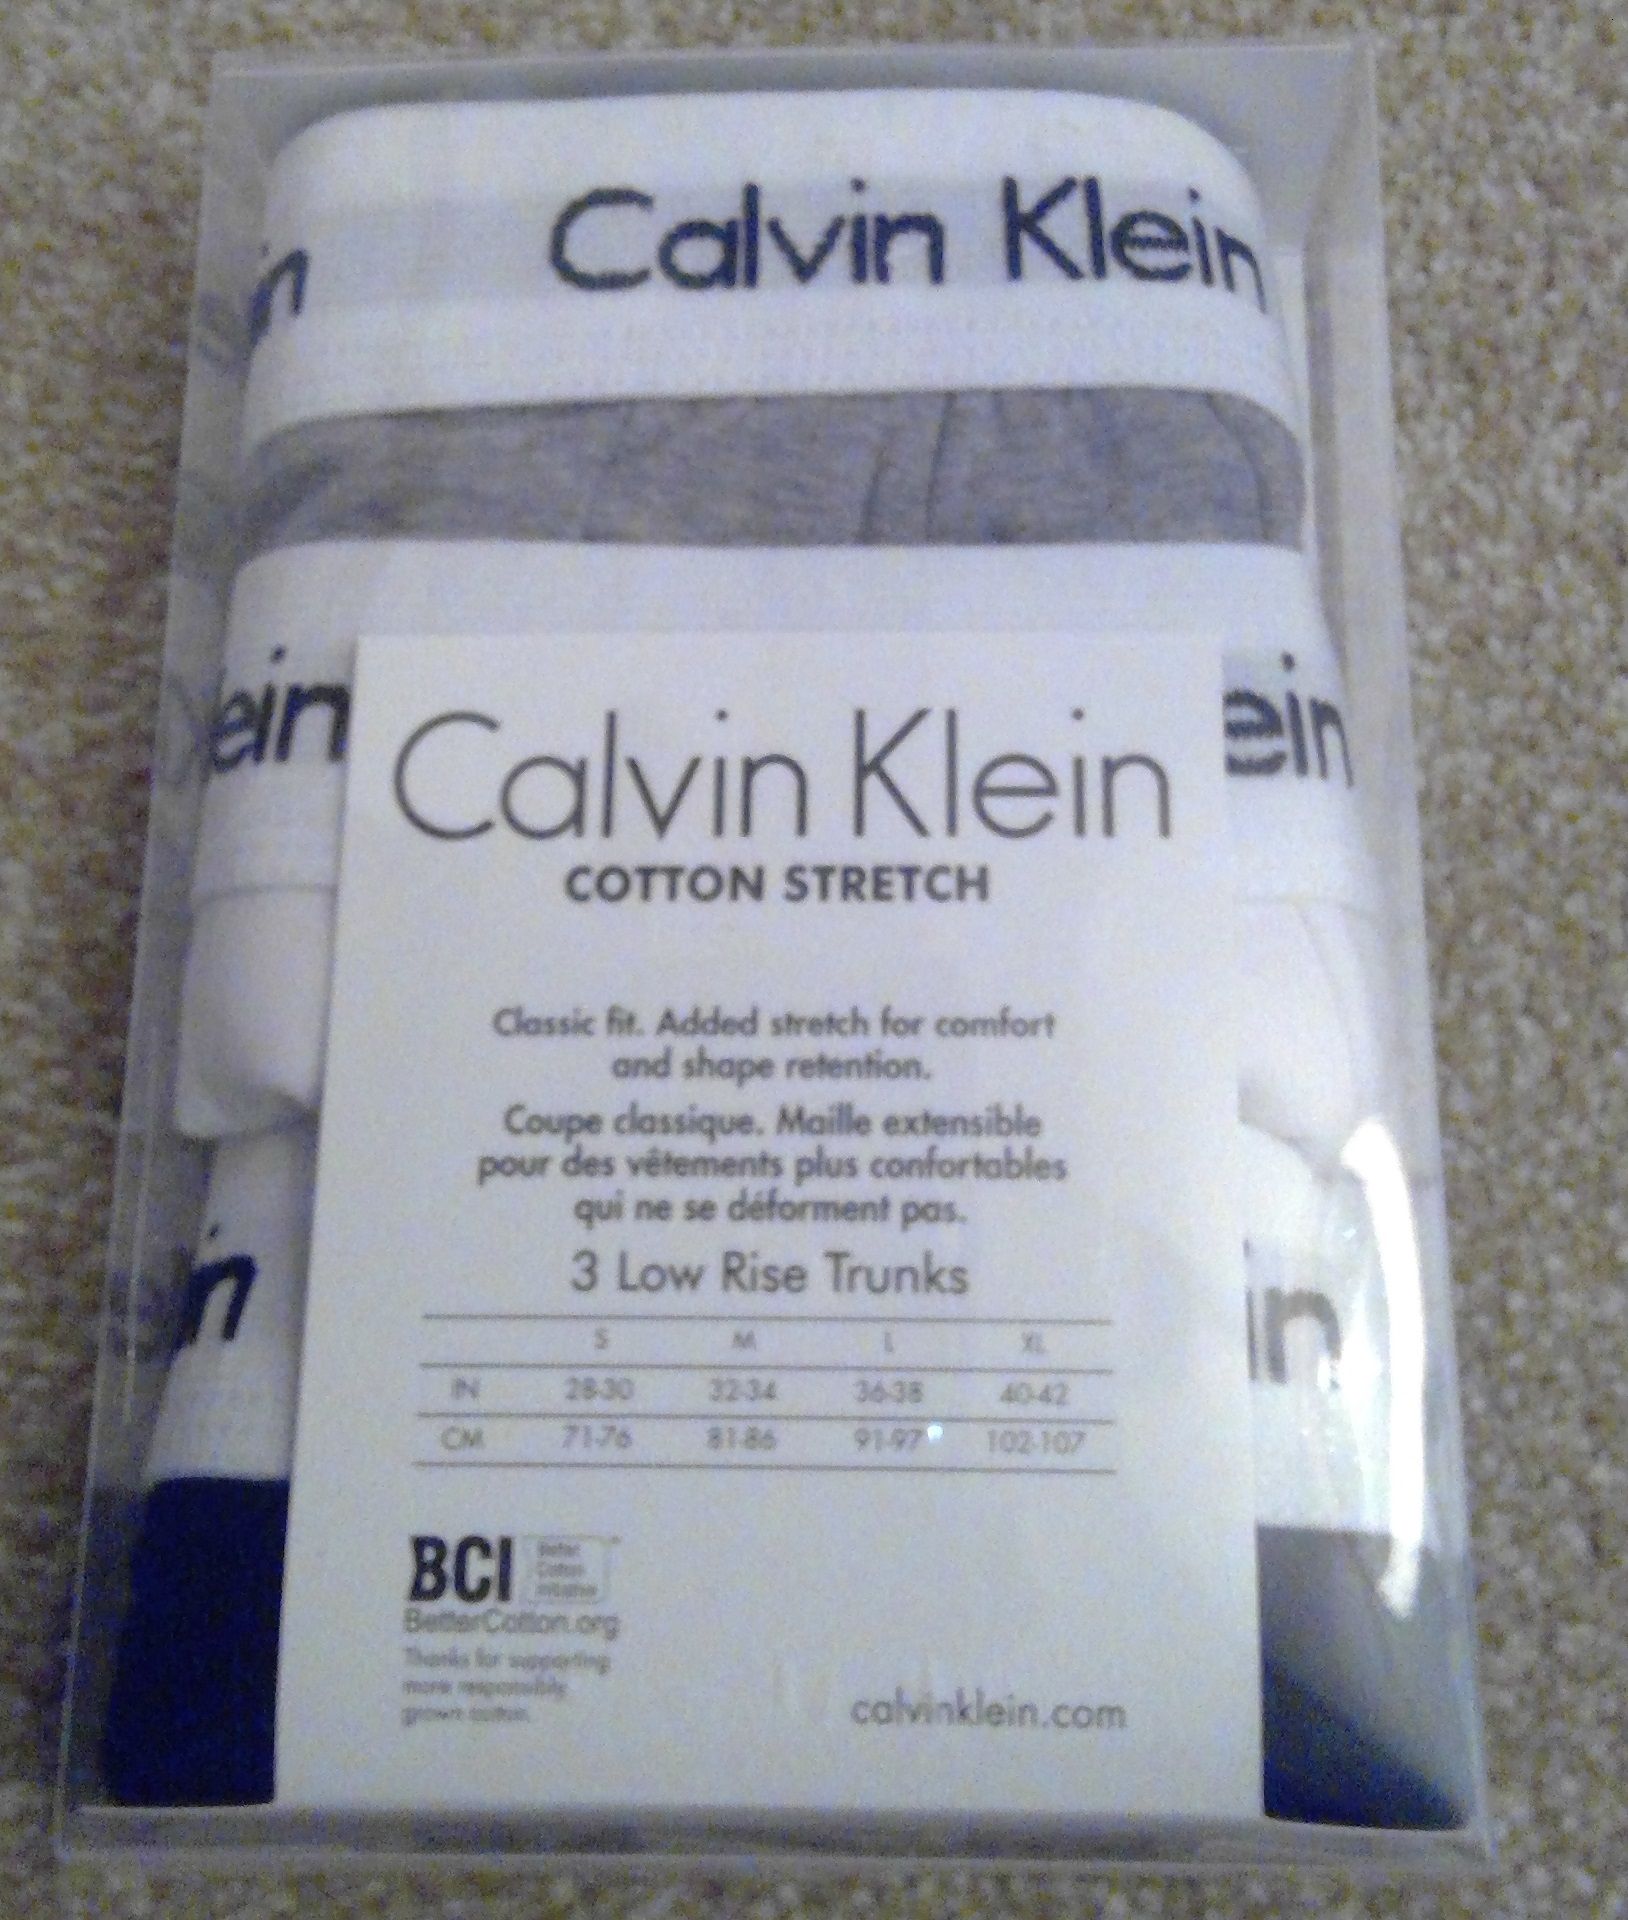 Brand New 3 Pack Calvin Klein Boxer Shorts. Size Small. Code U2664G. Colour Code 998 (White, grey, - Image 2 of 2